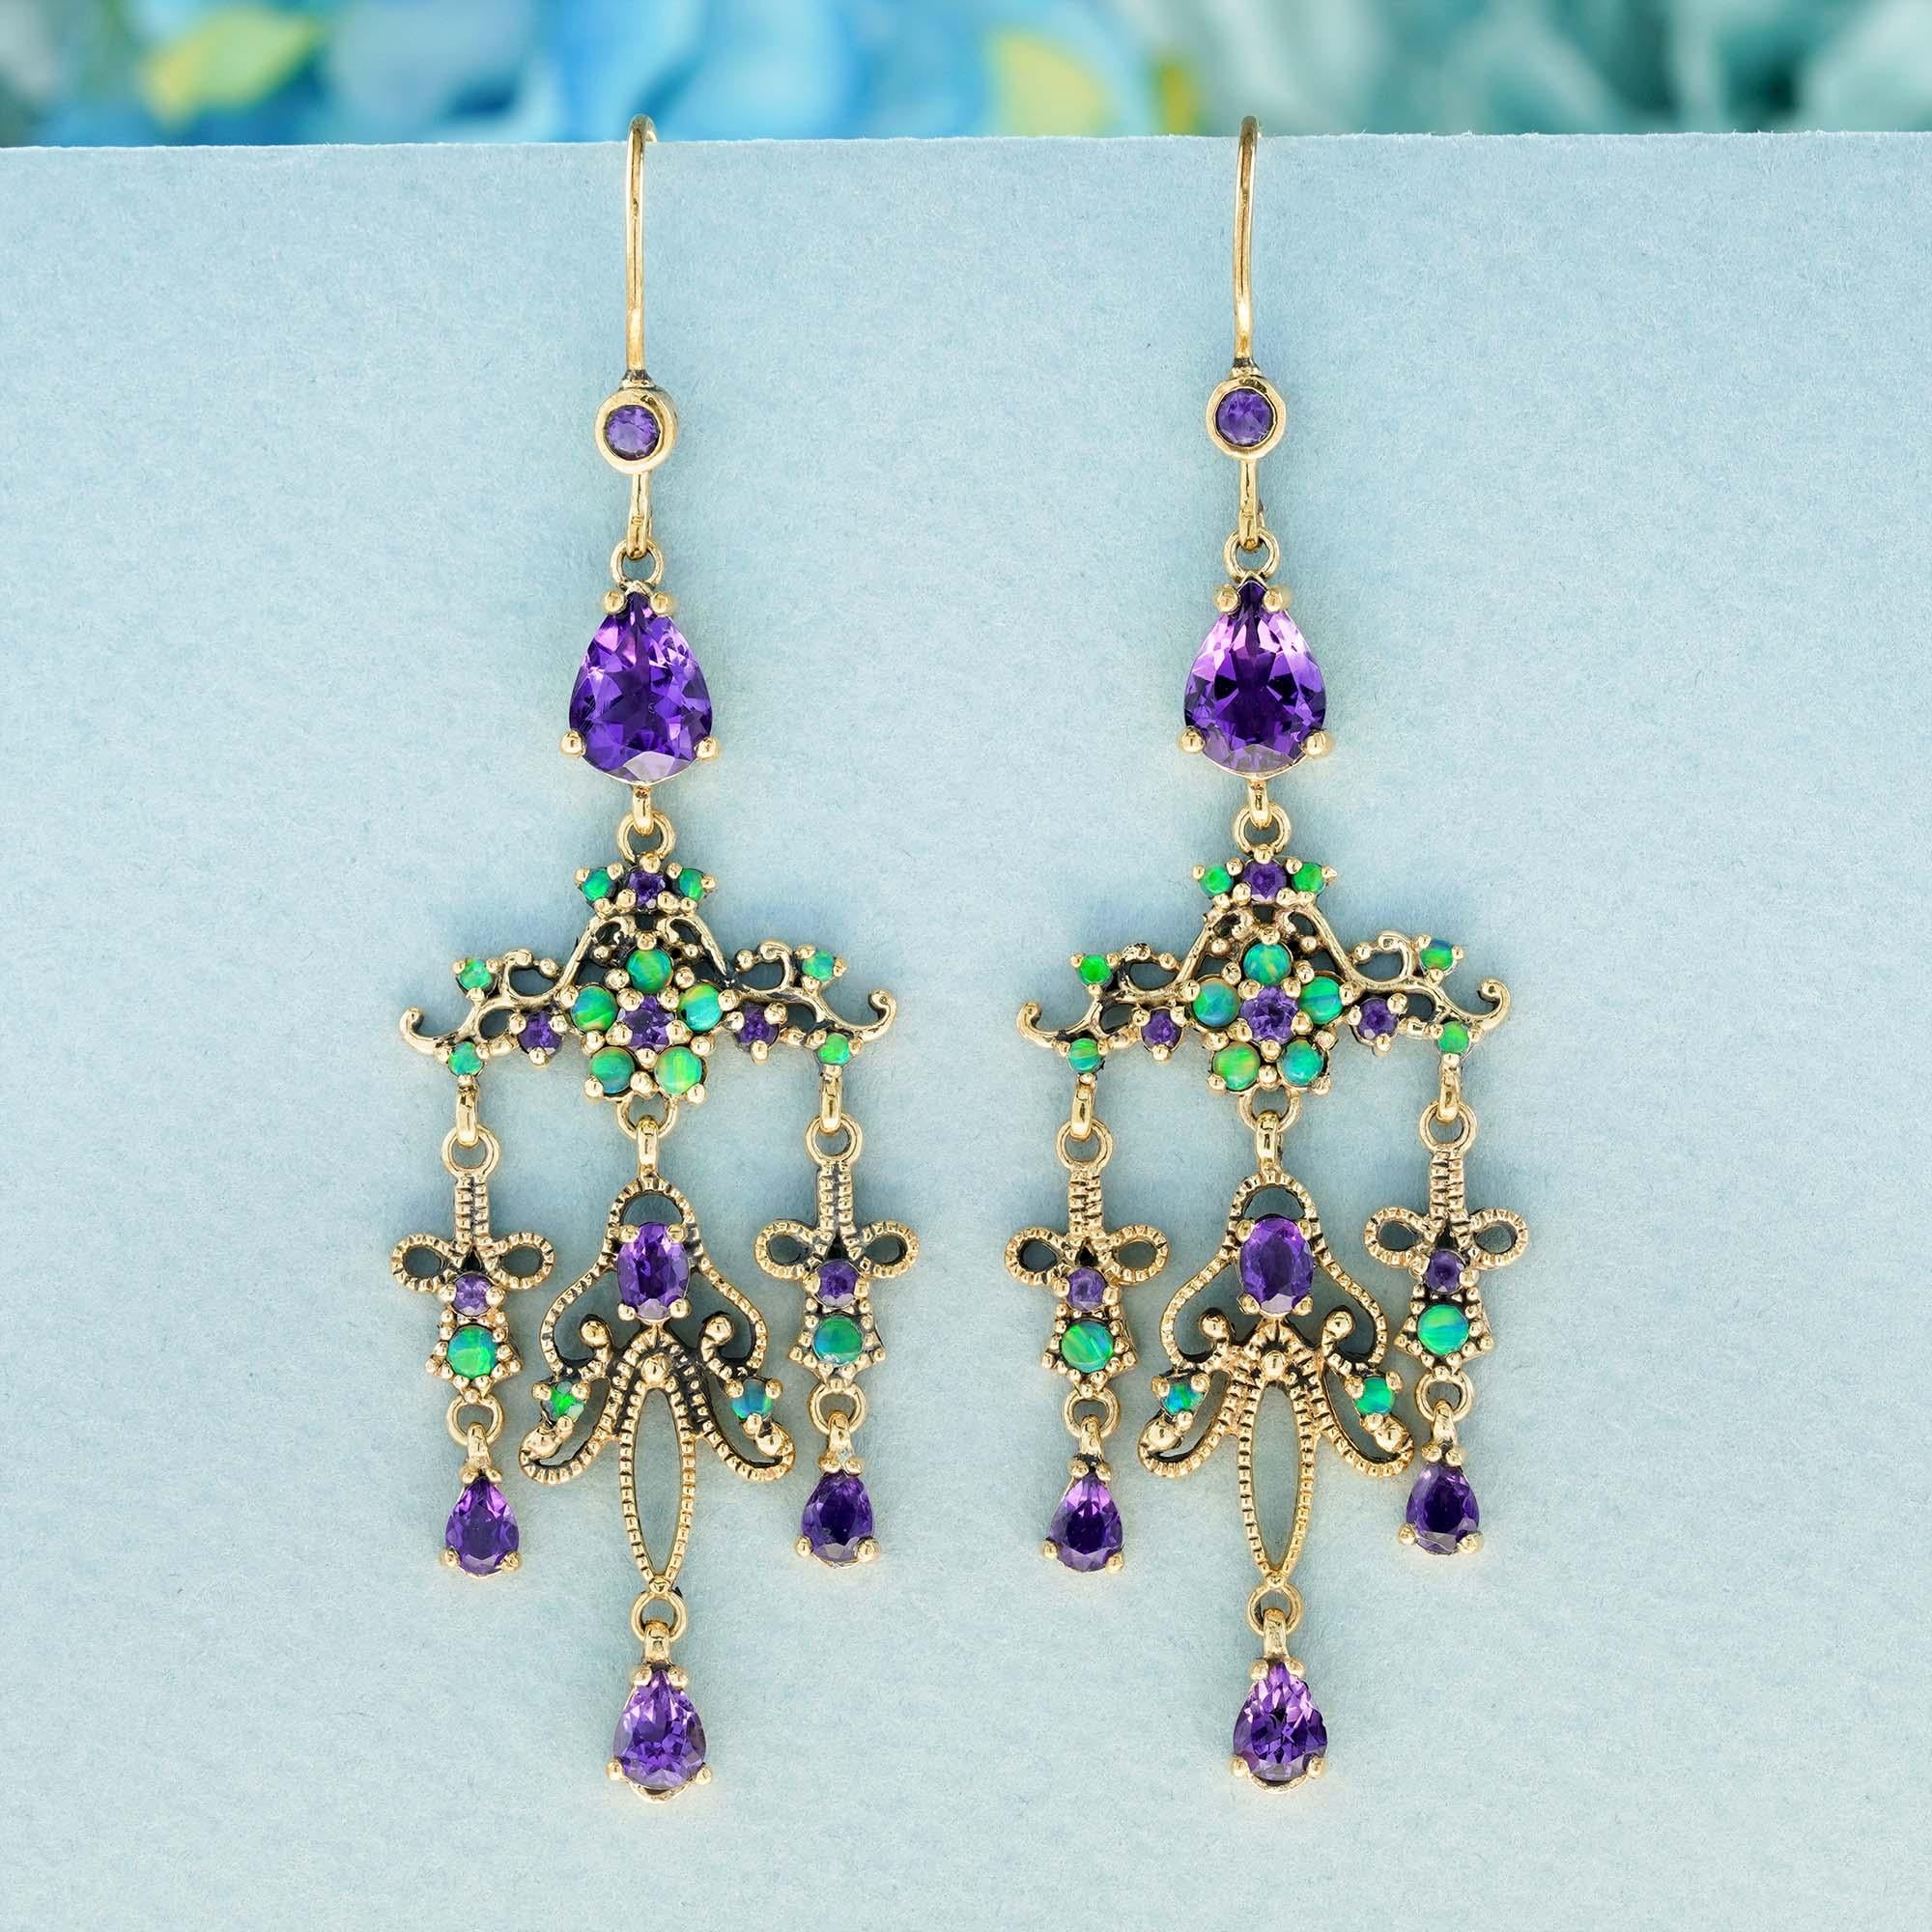 Crafted in yellow milgrained gold, these 4.9 carat vintage-inspired chandelier earrings in a style reminiscent of the Art Deco and Edwardian eras. They feature a cascade of gemstones in shades of purple and green, suspended from the gold hooks